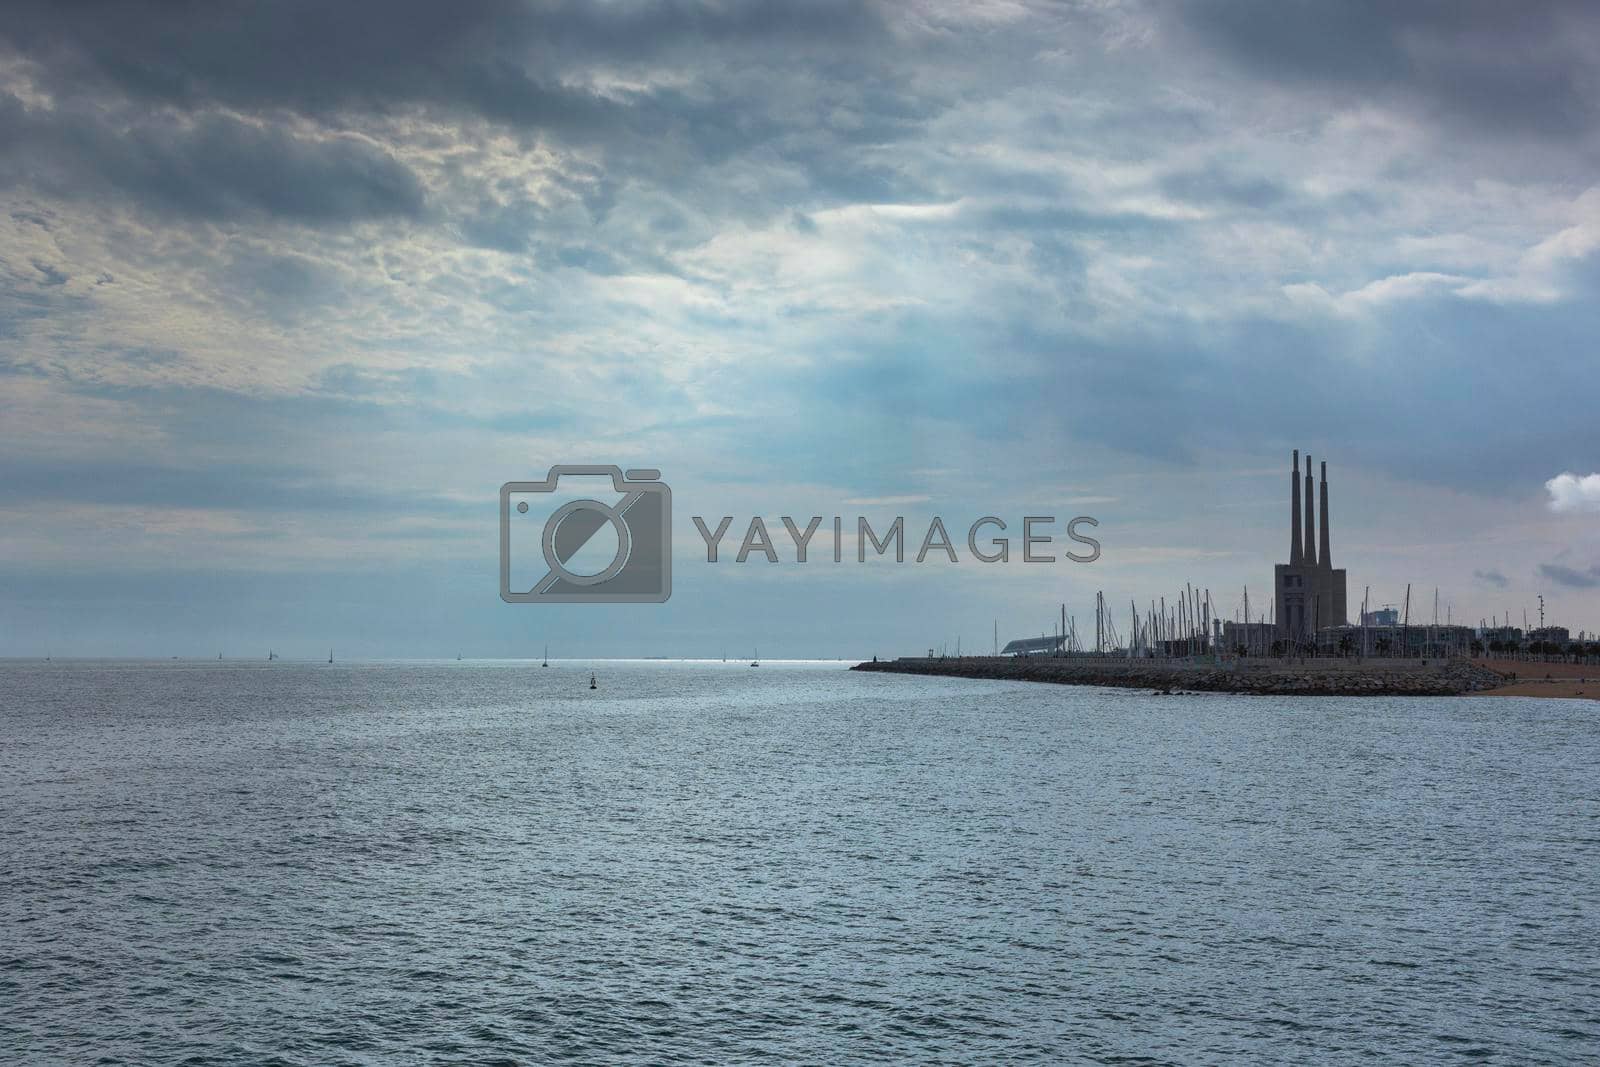 Seascape in the Mediterranean Sea with views of an old disused Thermal Power Plant for the production of electricity in Barcelona